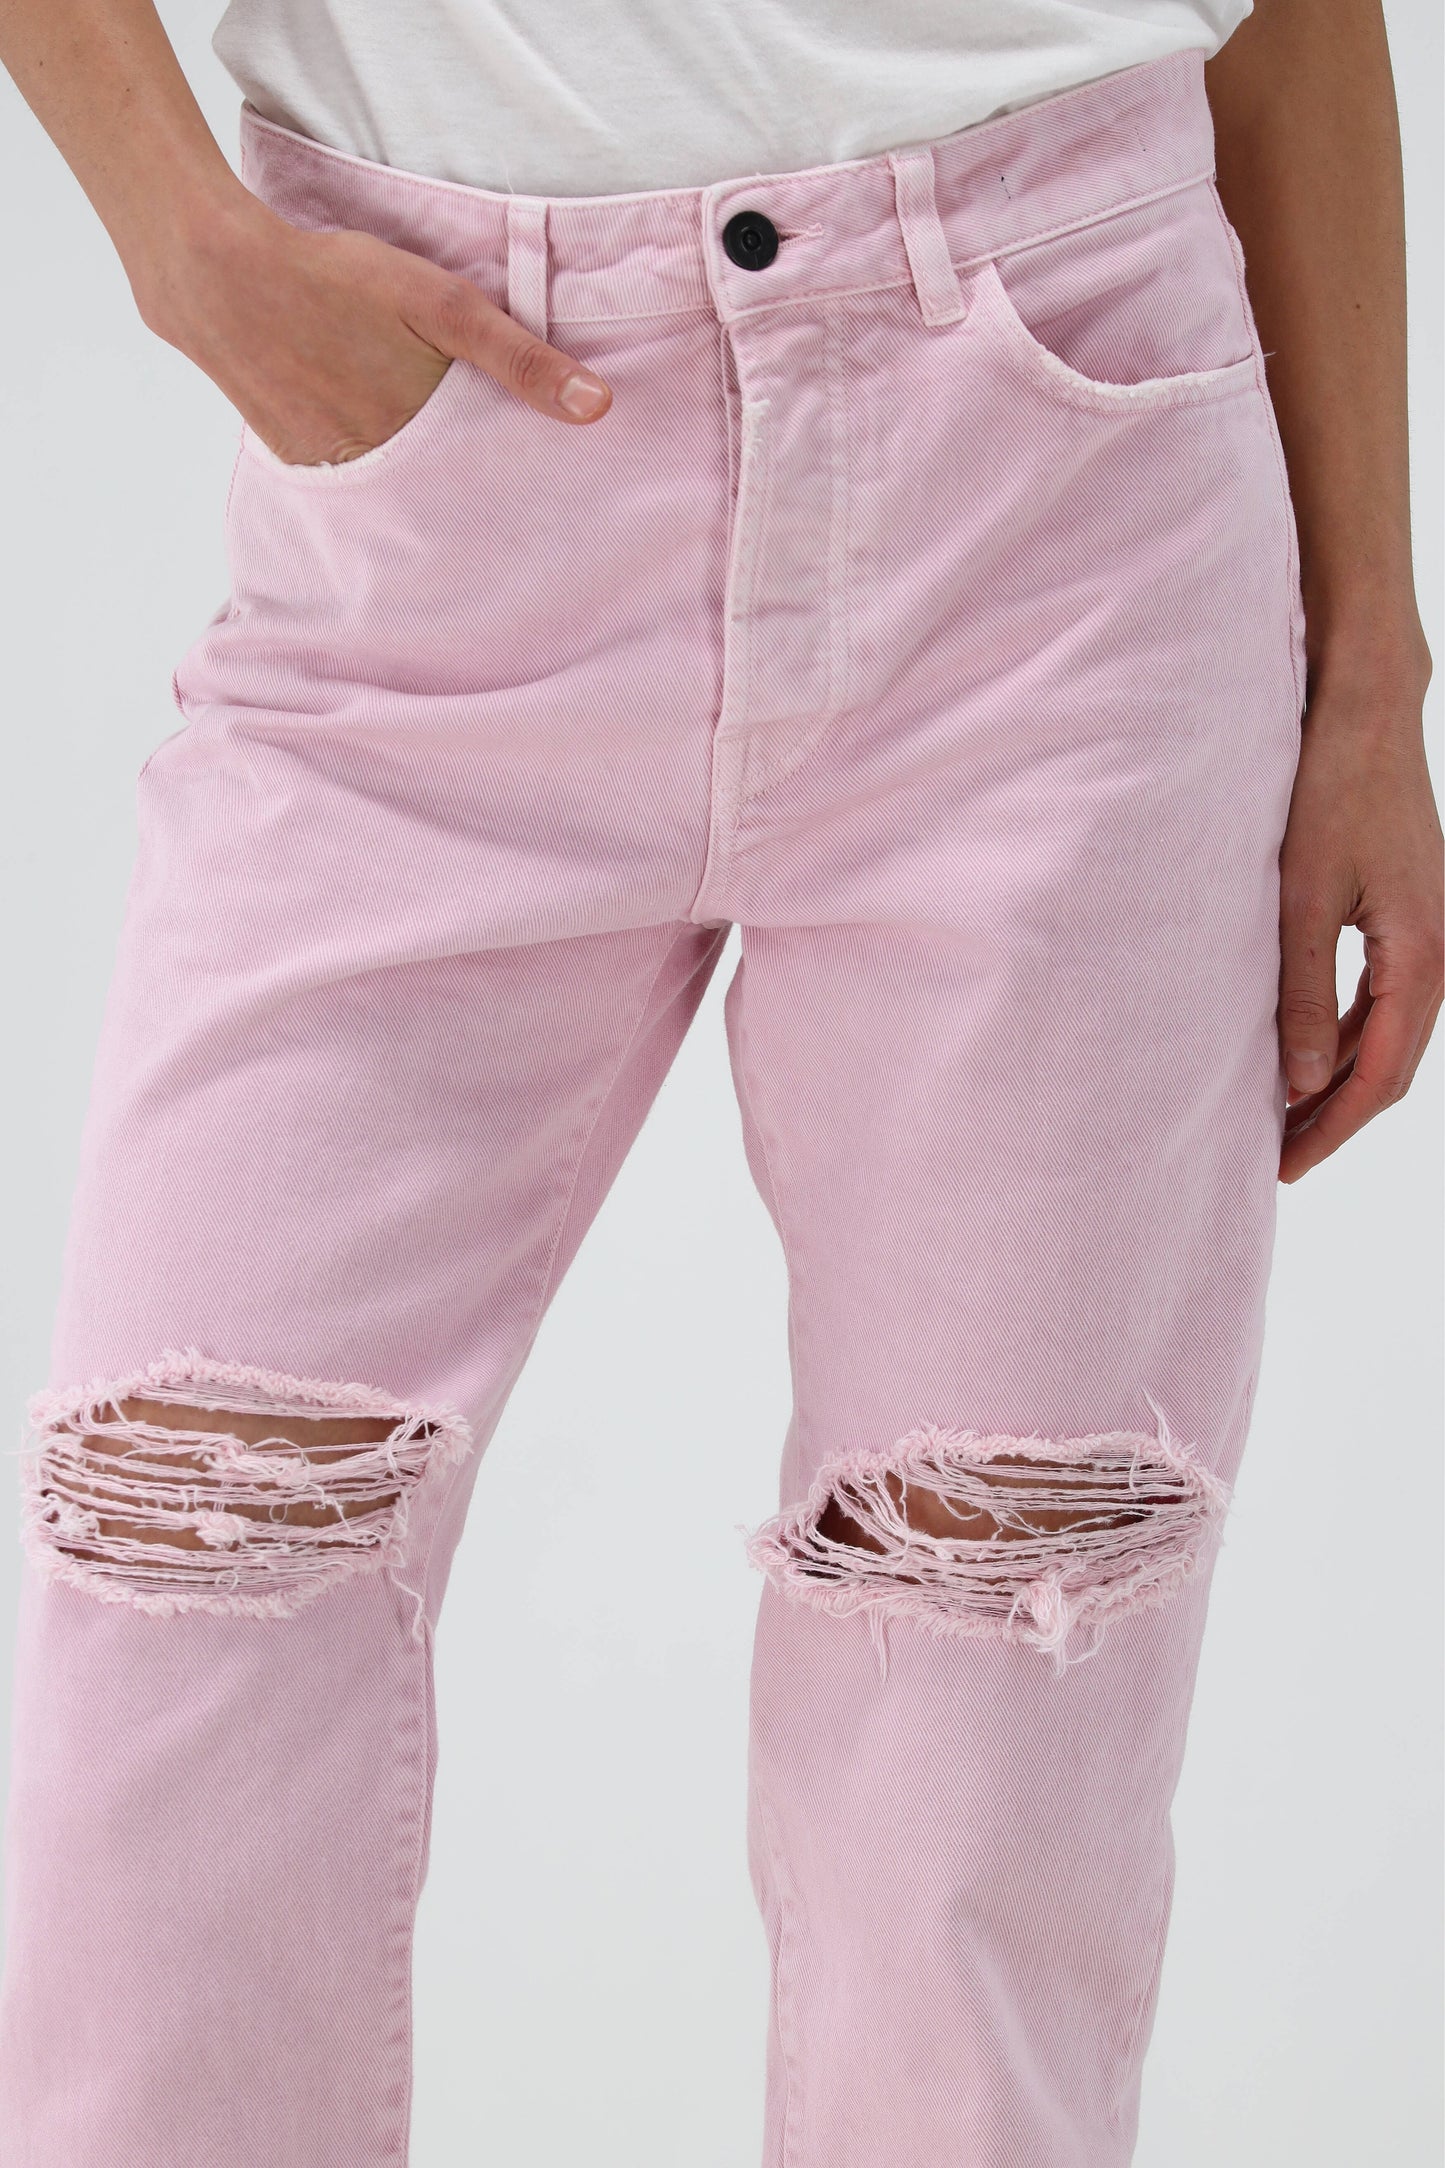 Jeans Sabina Destroyed in Mineral Rose3x1 - Anita Hass